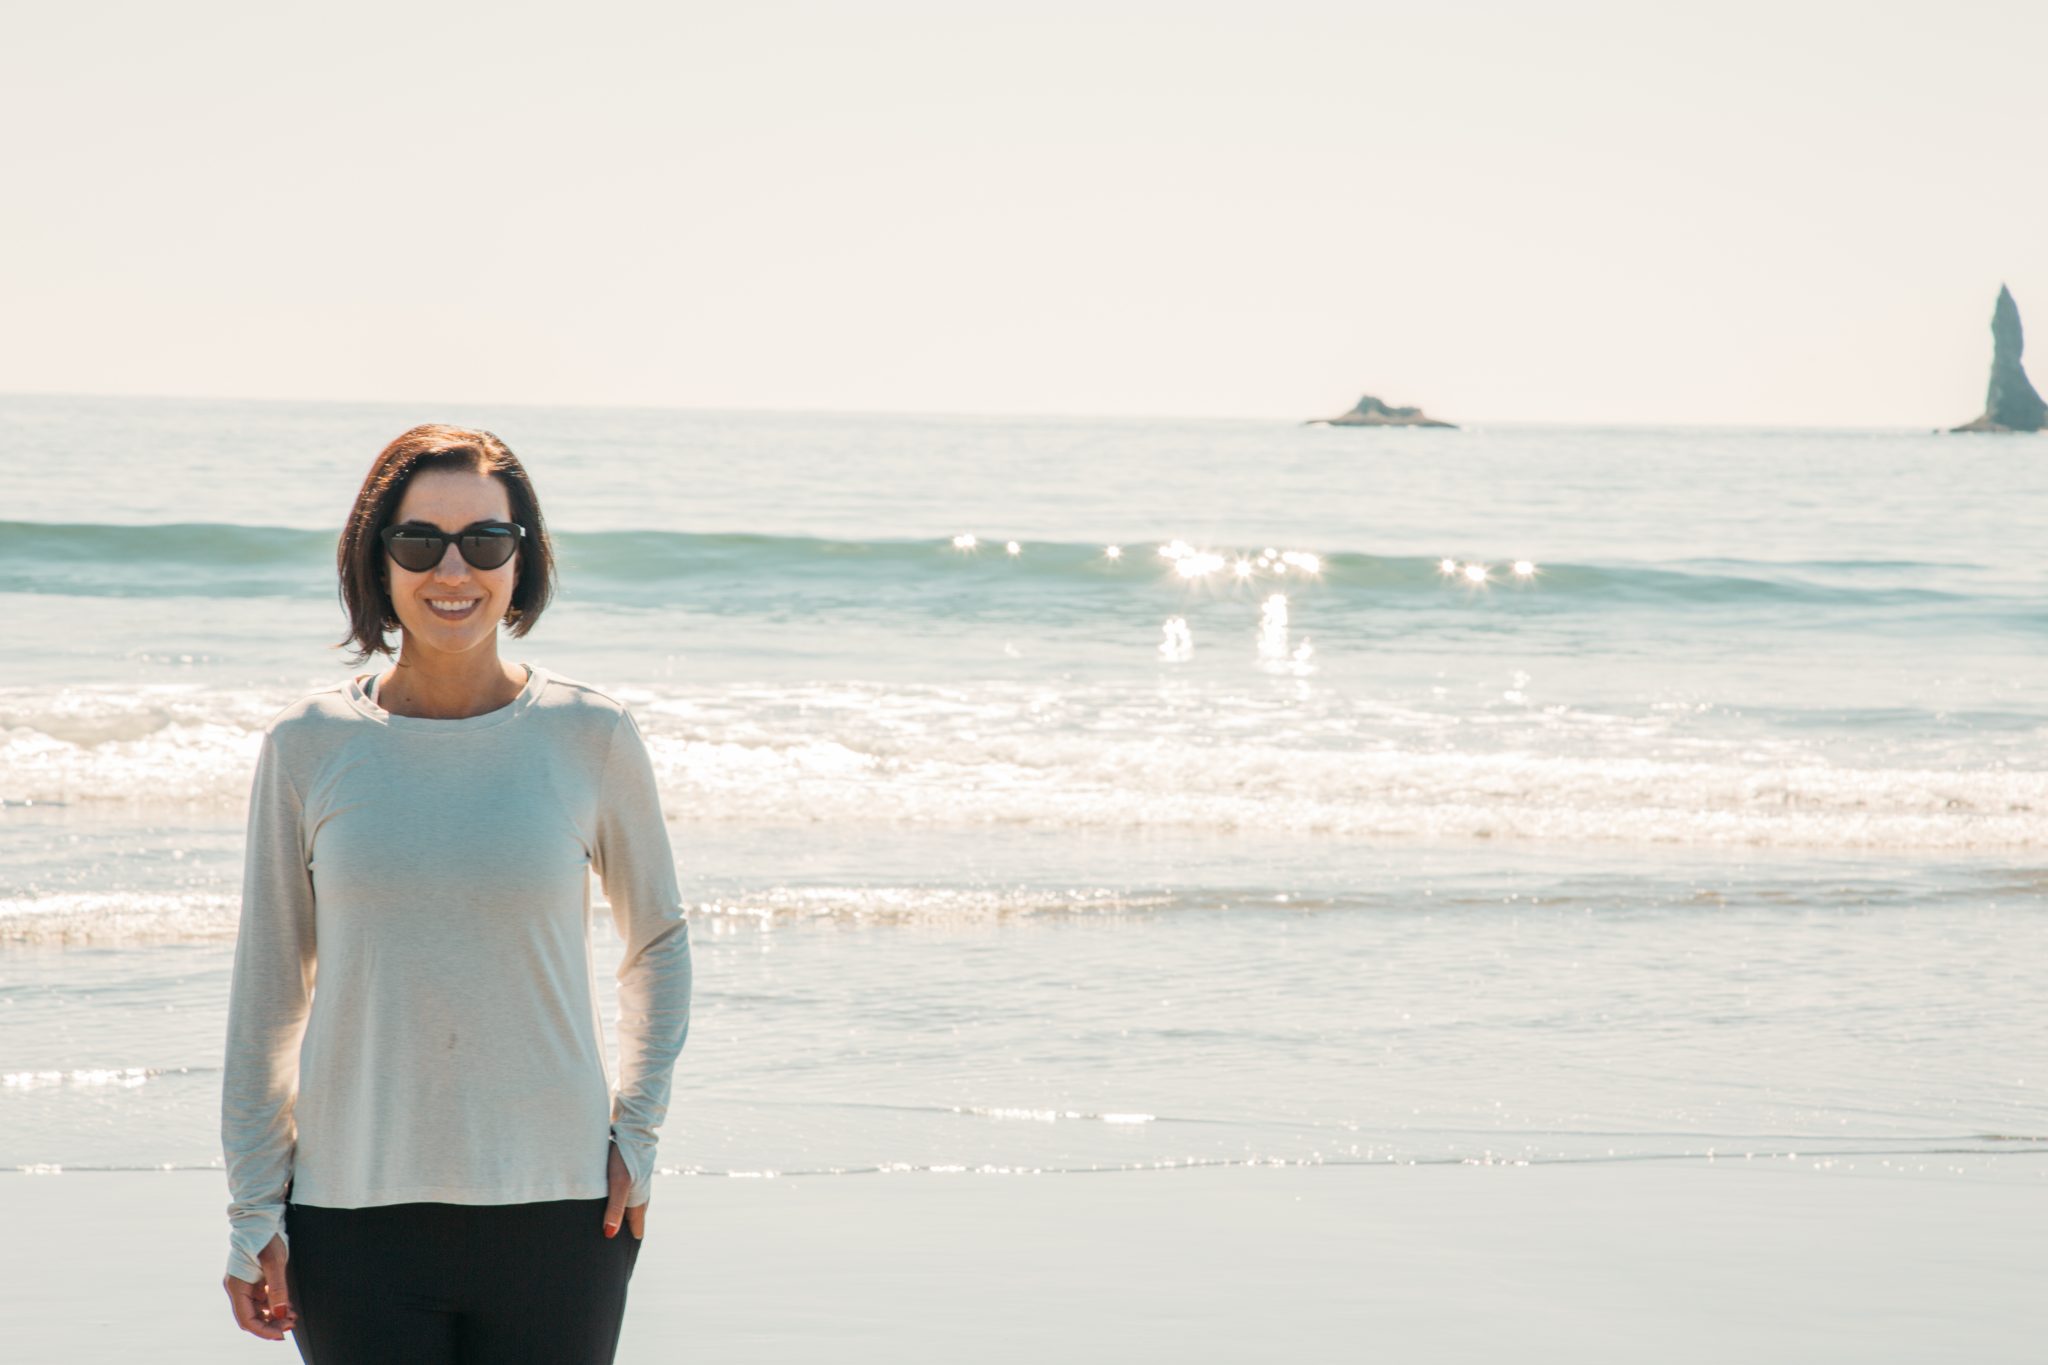 A woman stands in front of the ocean, waves crashing behind her, smiling at the camera. She's wearing a white long sleeve shirt and black pants.